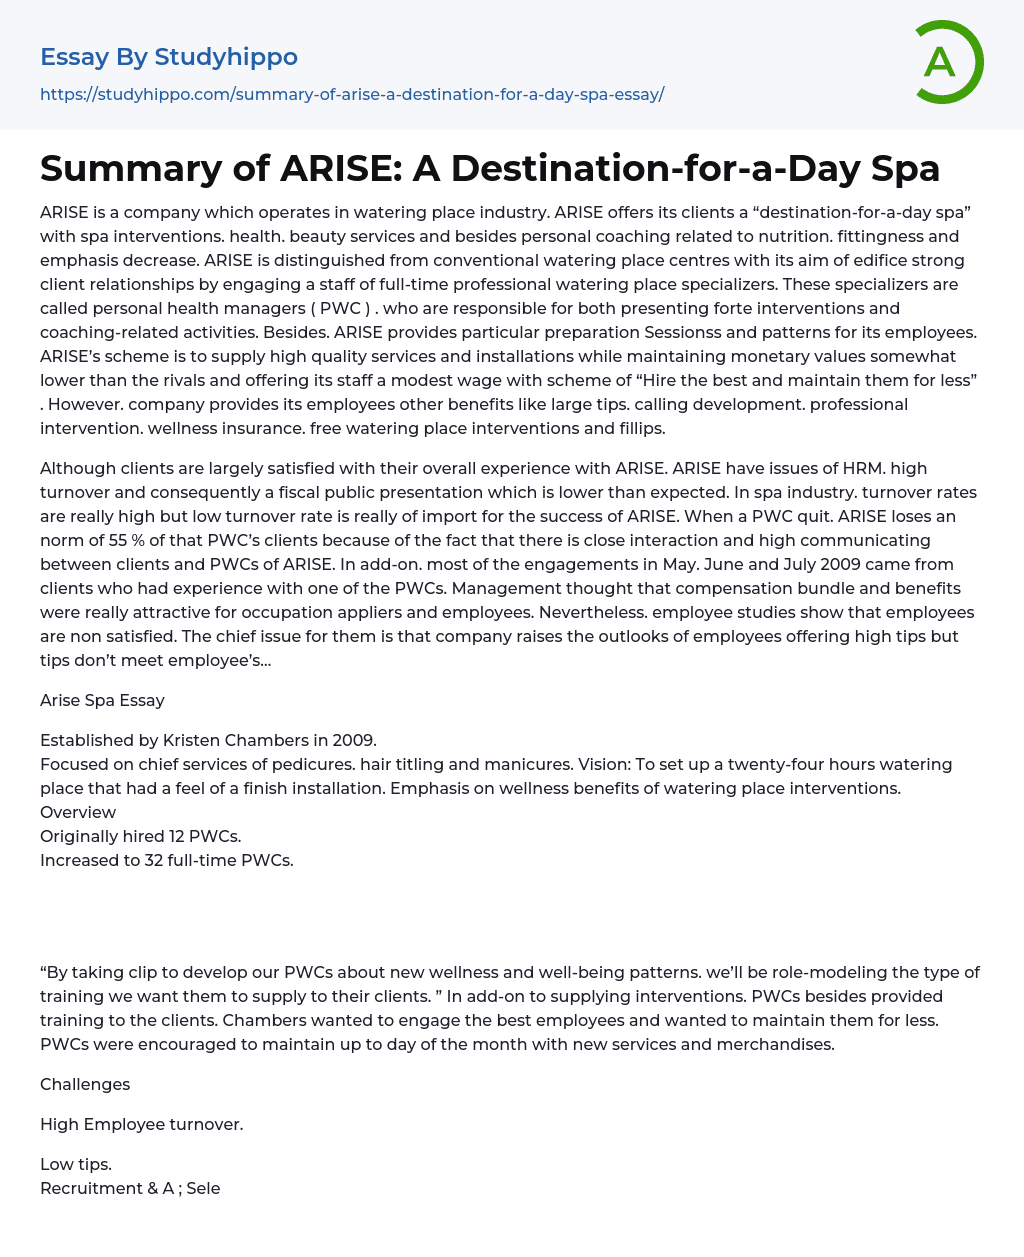 Summary of ARISE: A Destination-for-a-Day Spa Essay Example